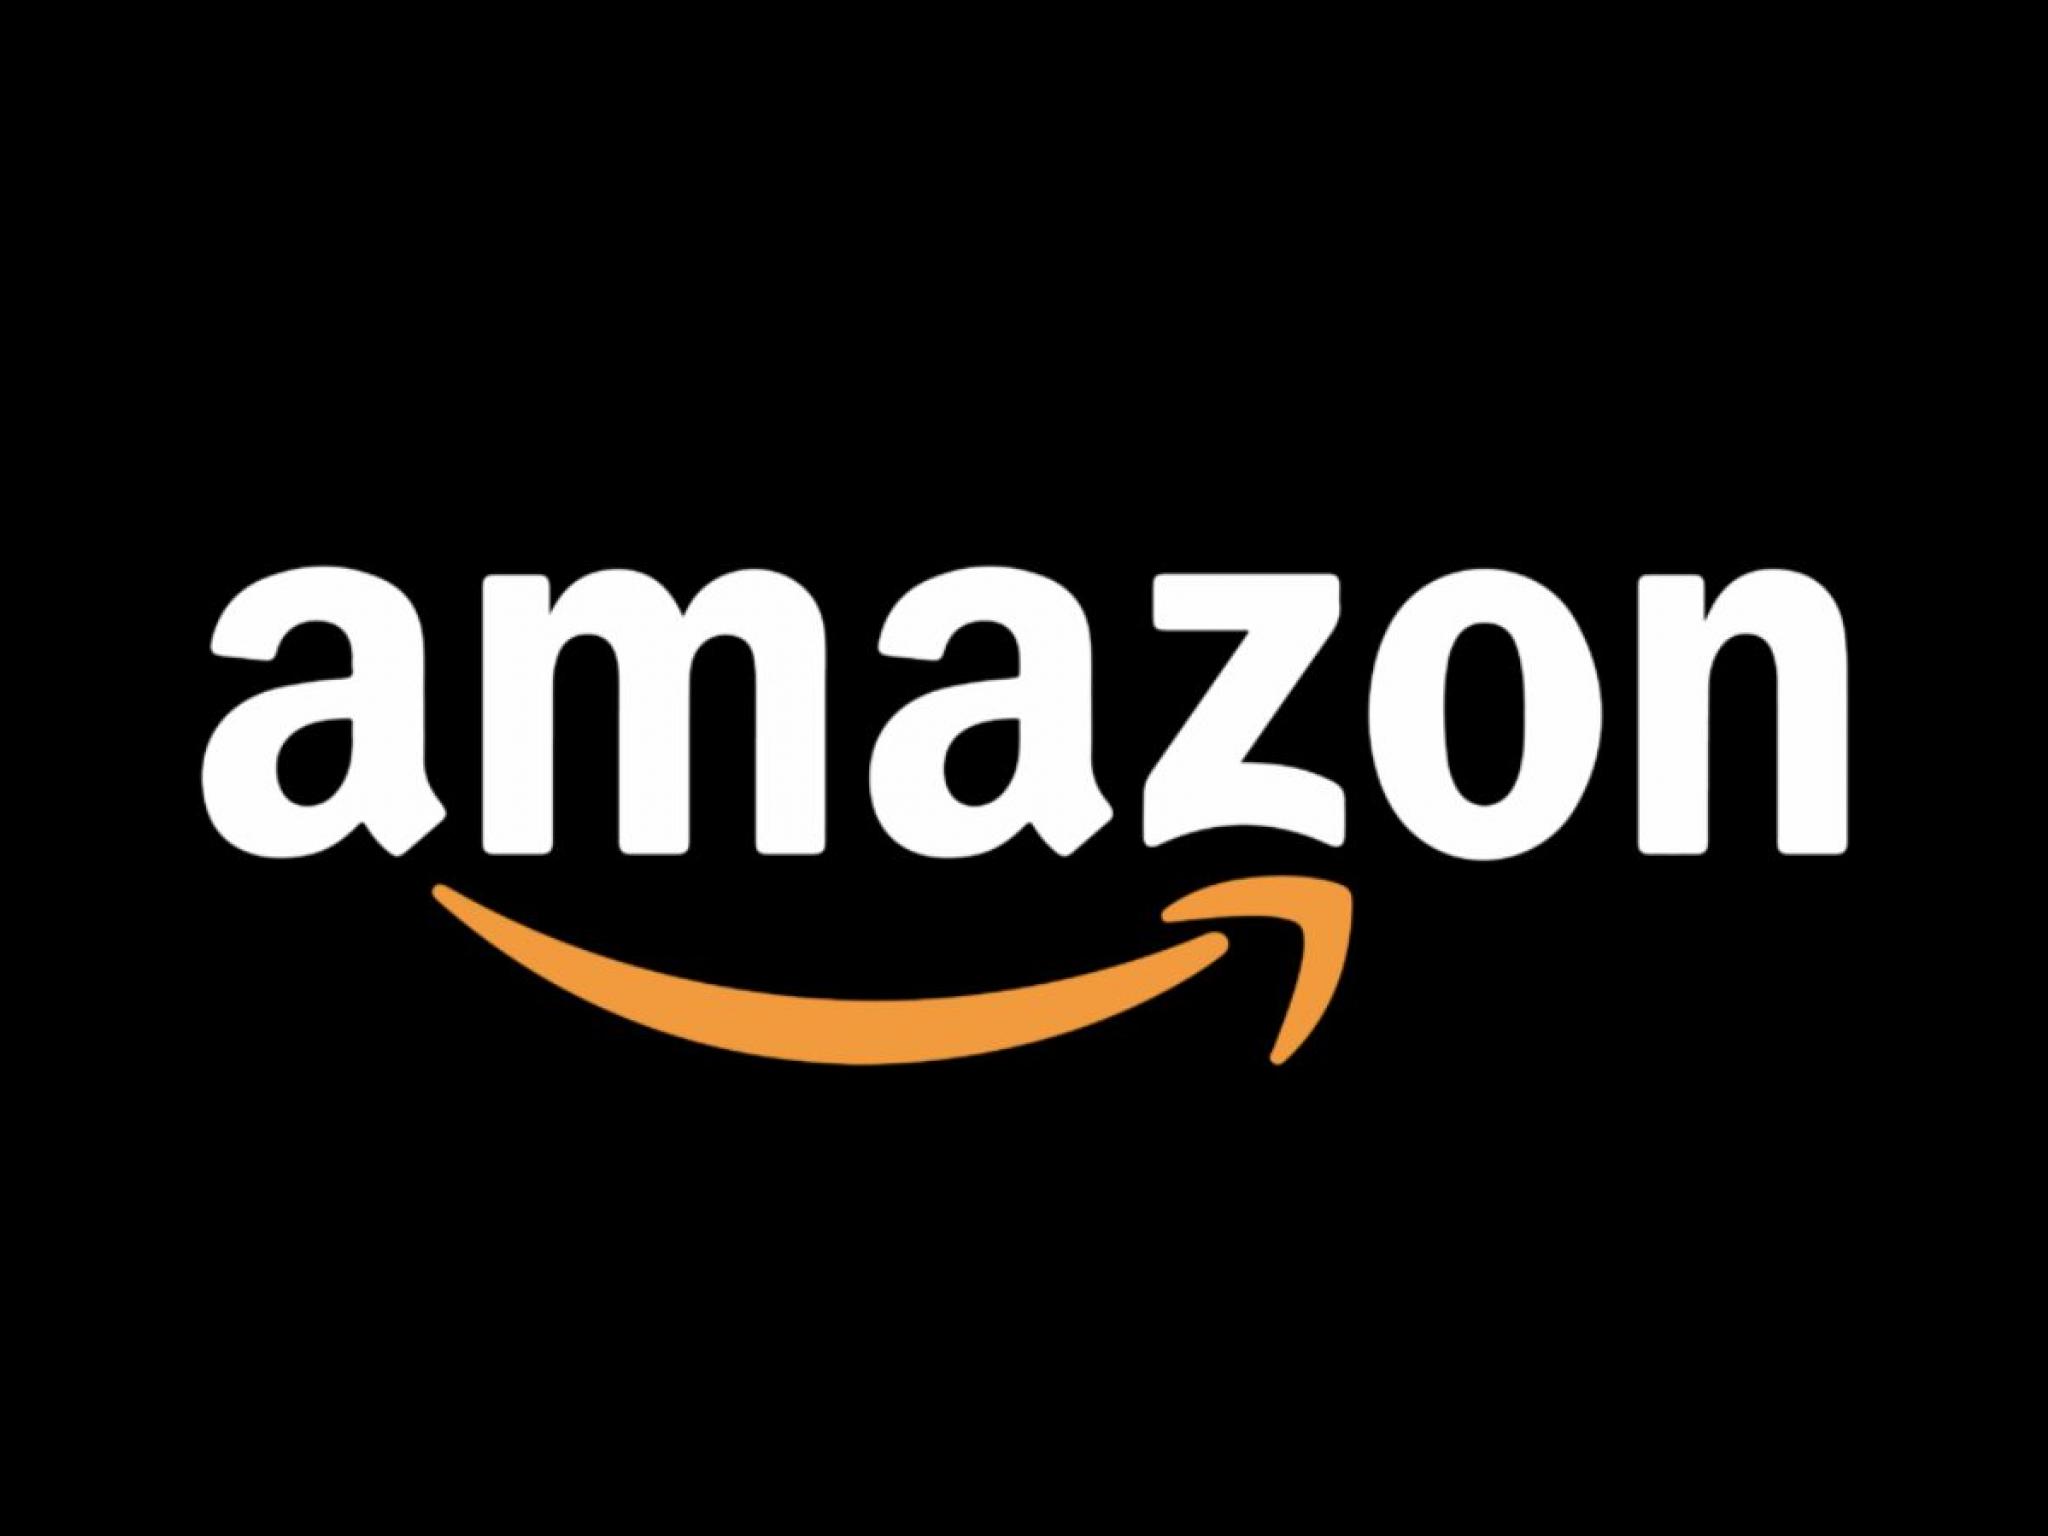  amazoncom-to-rally-over-38-here-are-10-top-analyst-forecasts-for-thursday 